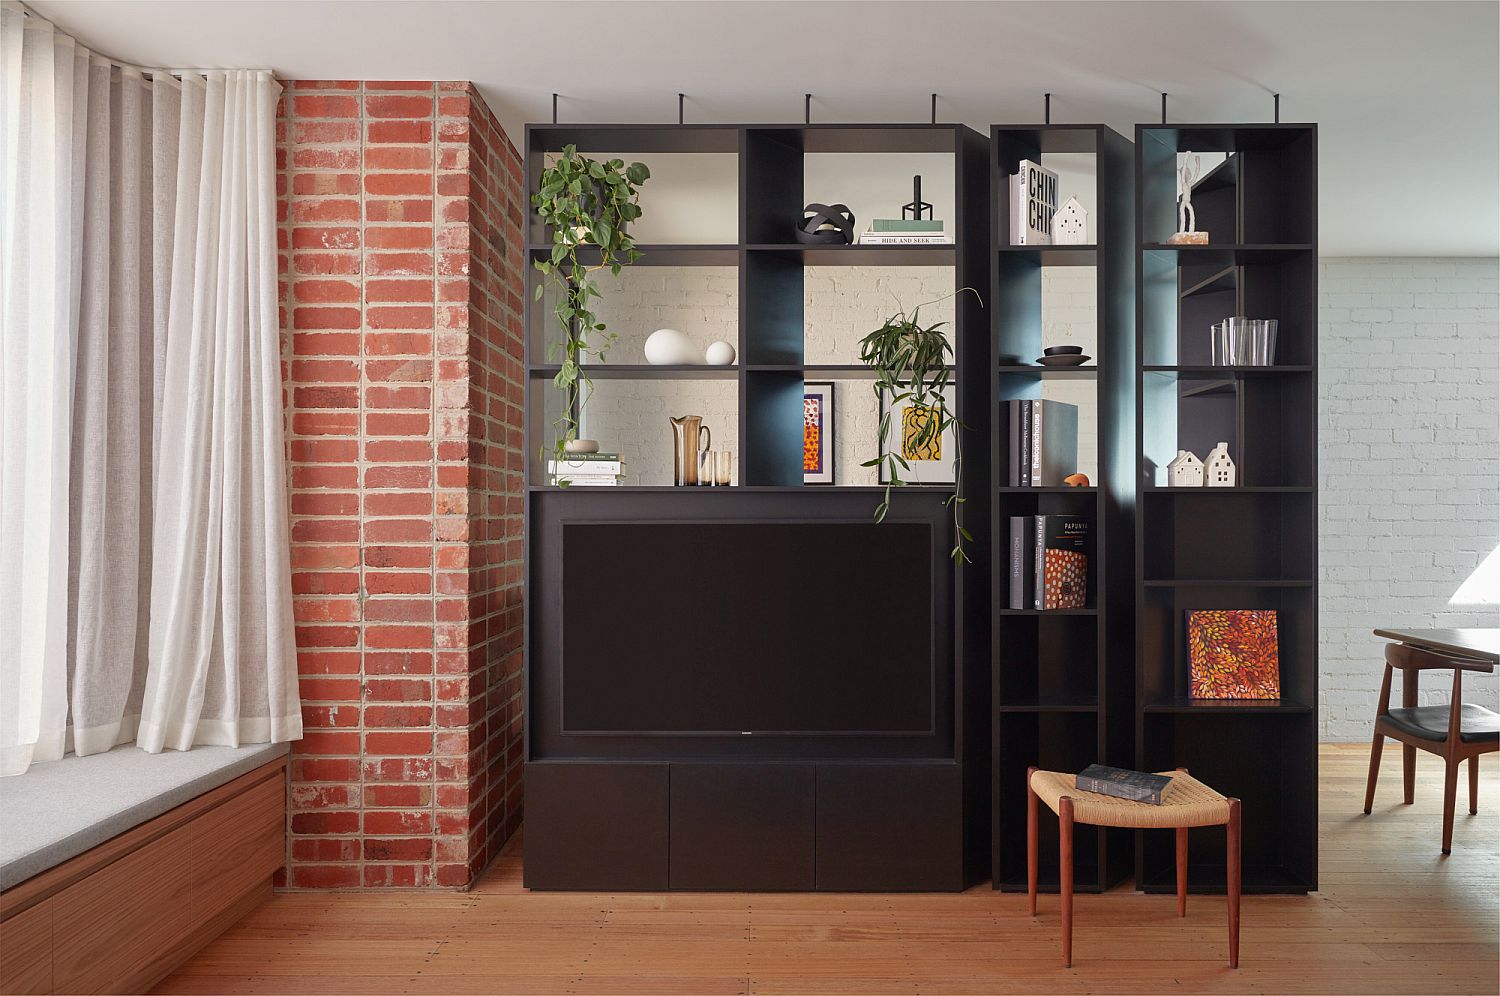 Custom-black-TV-unit-and-shelving-for-the-living-space